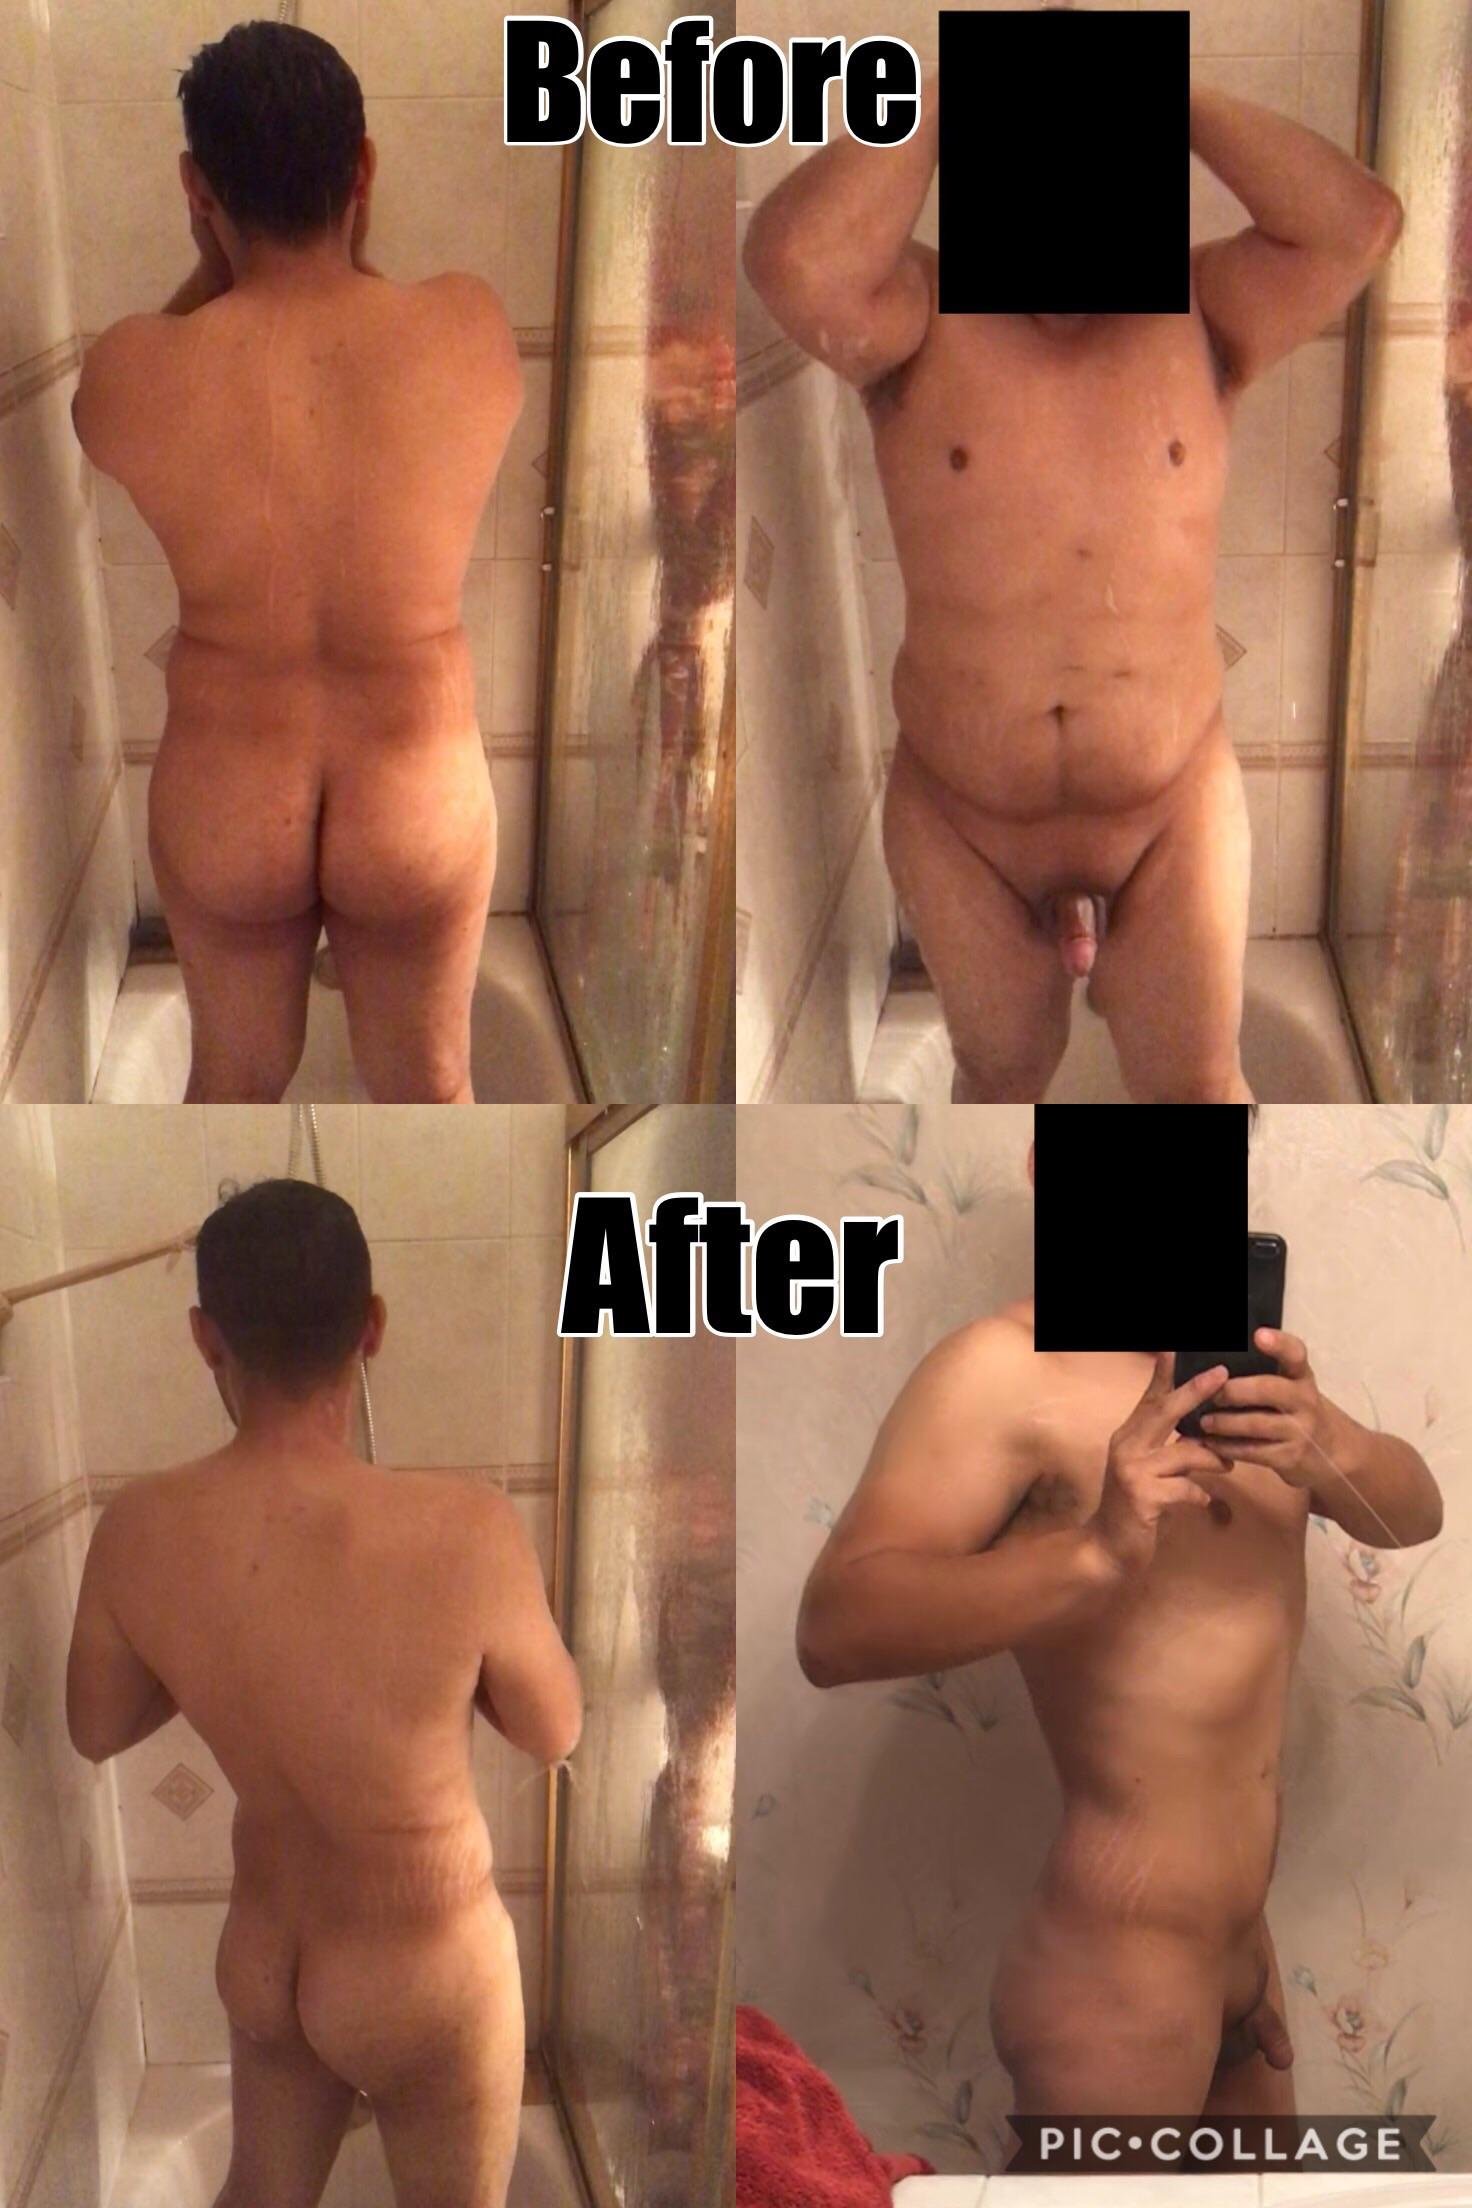 M / 5’7” / 162lbs progress pics. -65lbs and counting. (Update)